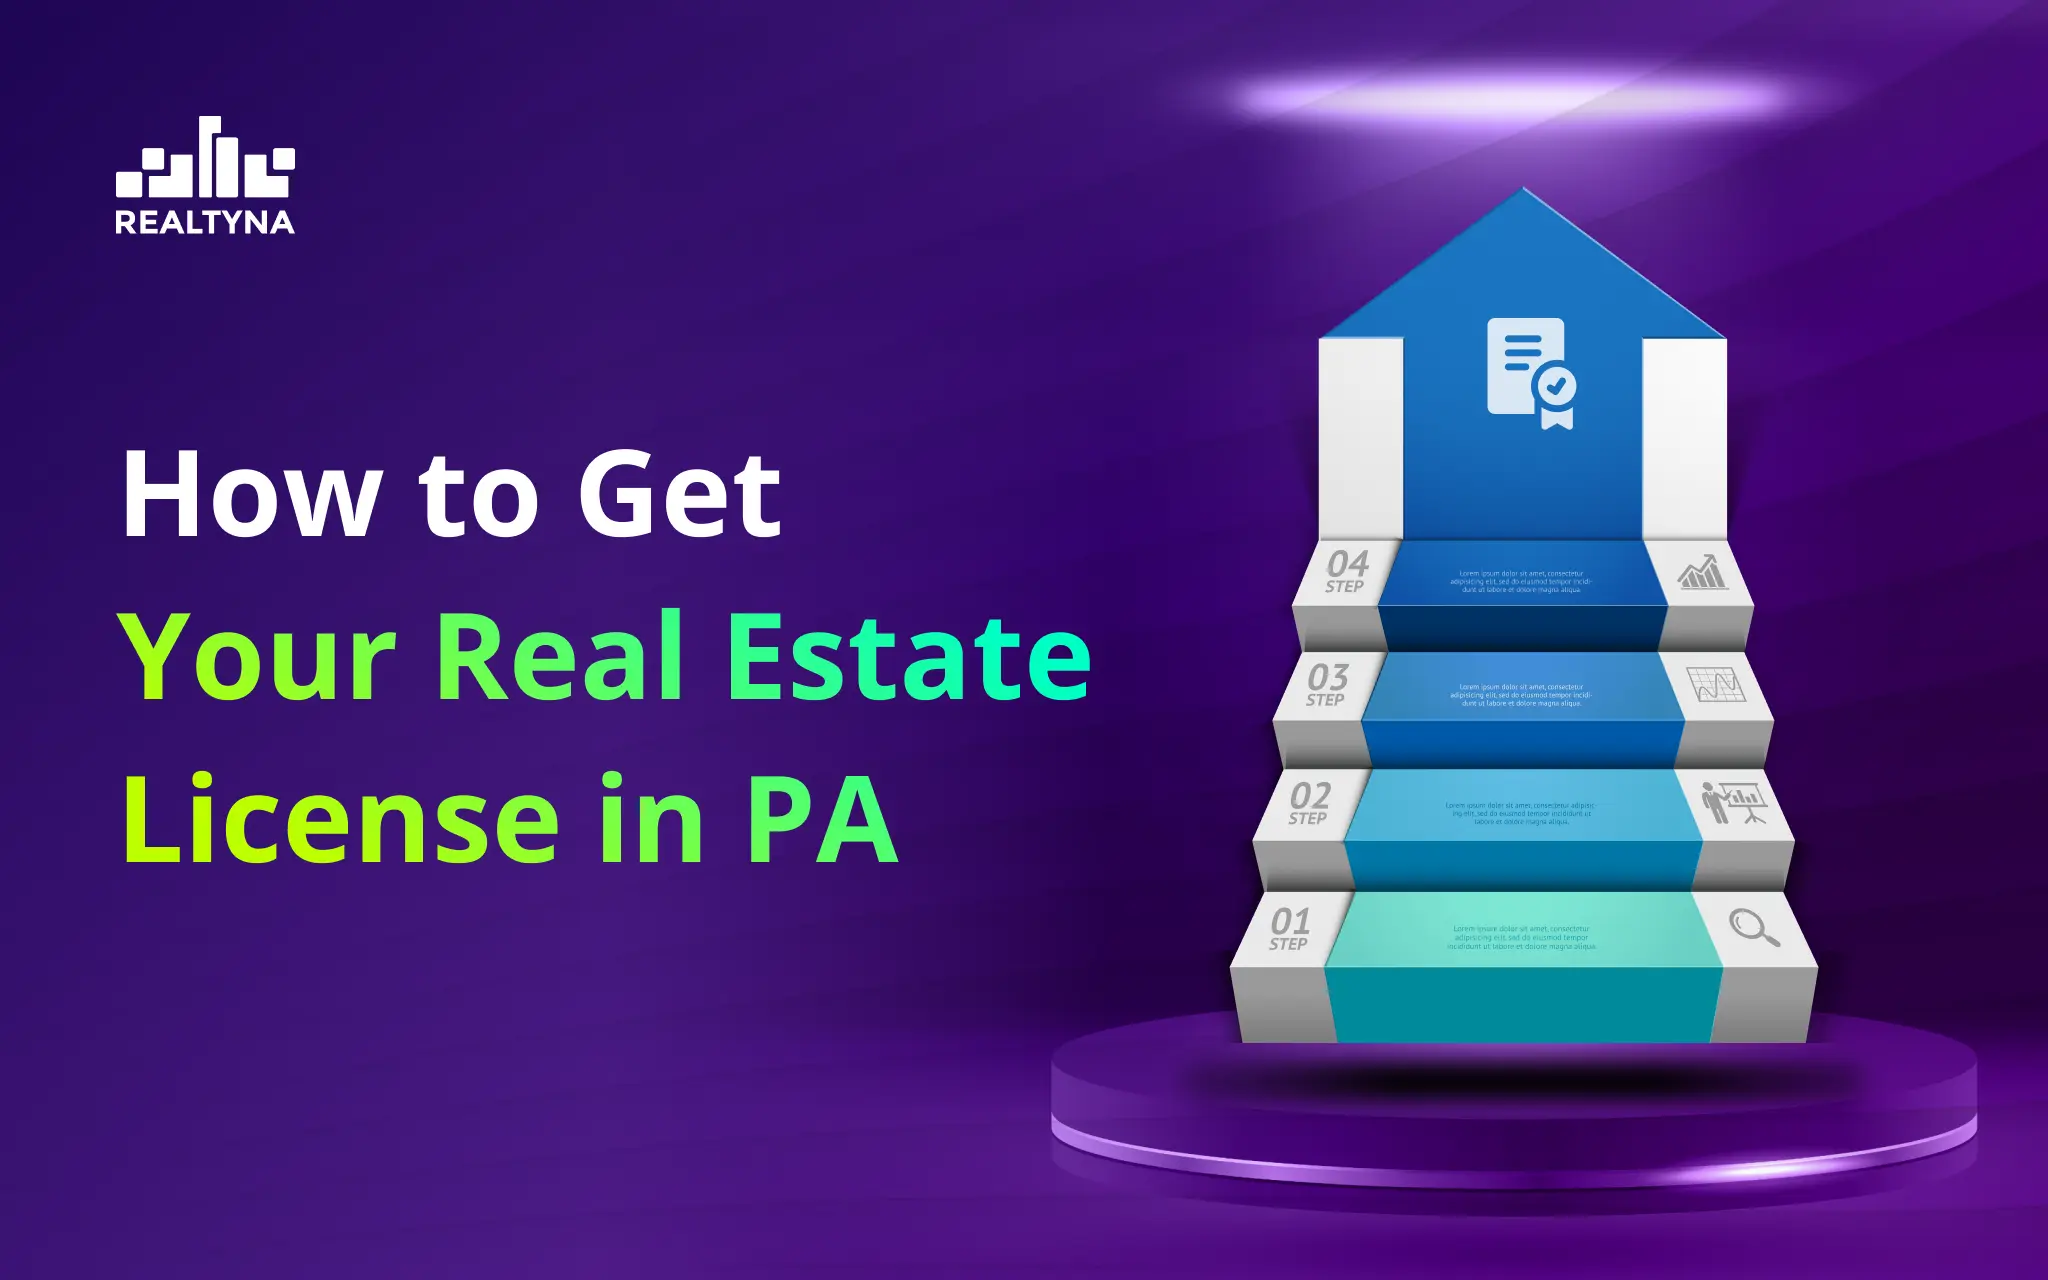 How to Get Your Real Estate License in PA